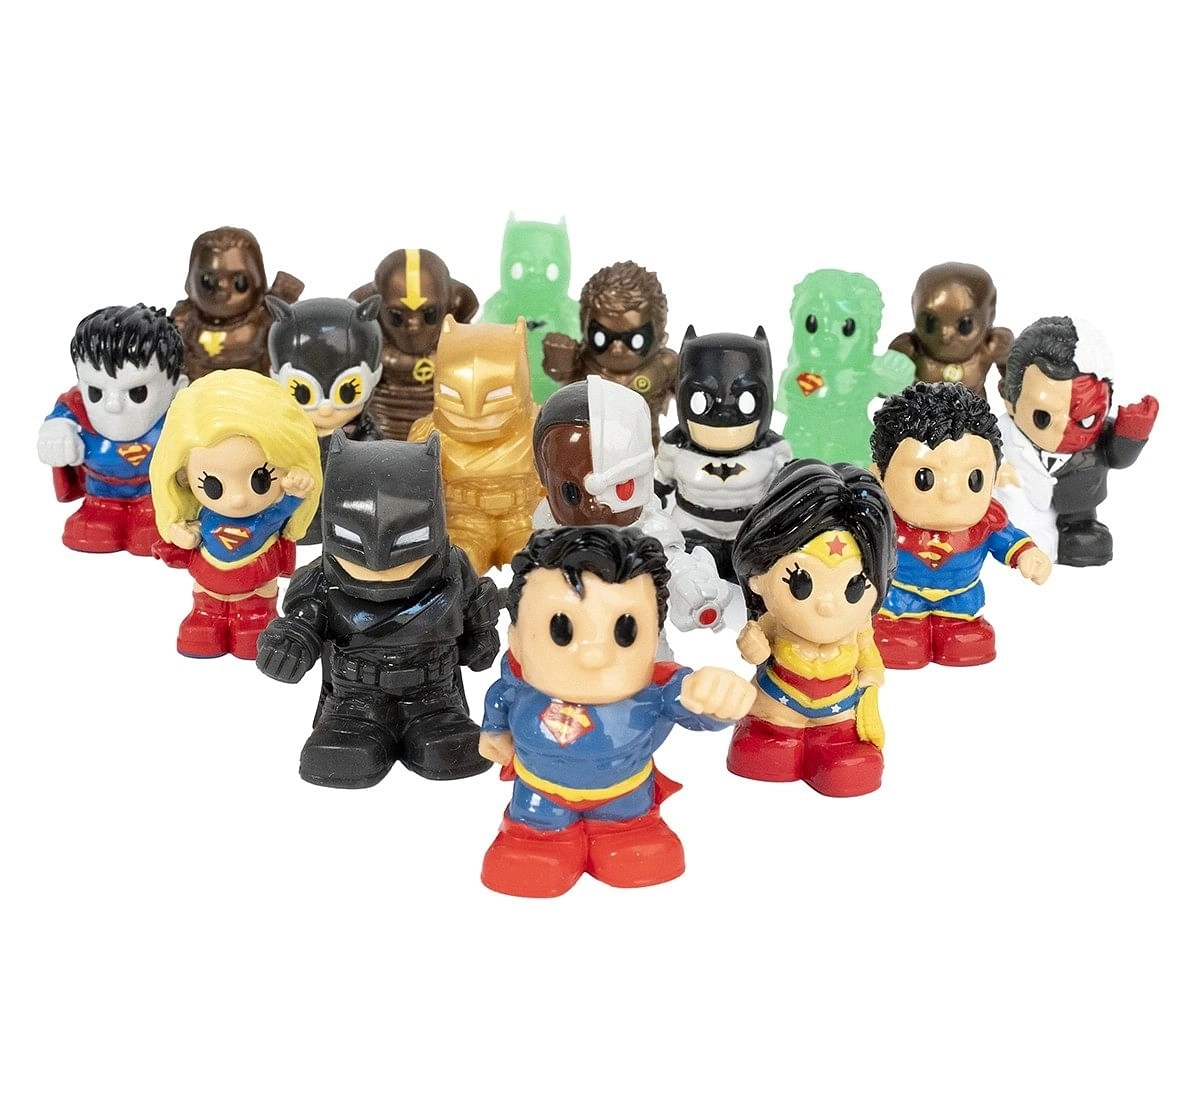 Ooshies Xl 6Pcs Superboy, New Outfit Batman, Bronze The Flash, Cyborg, Two Face, One Surprise Ooshie,  5Y+ (Multicolor)